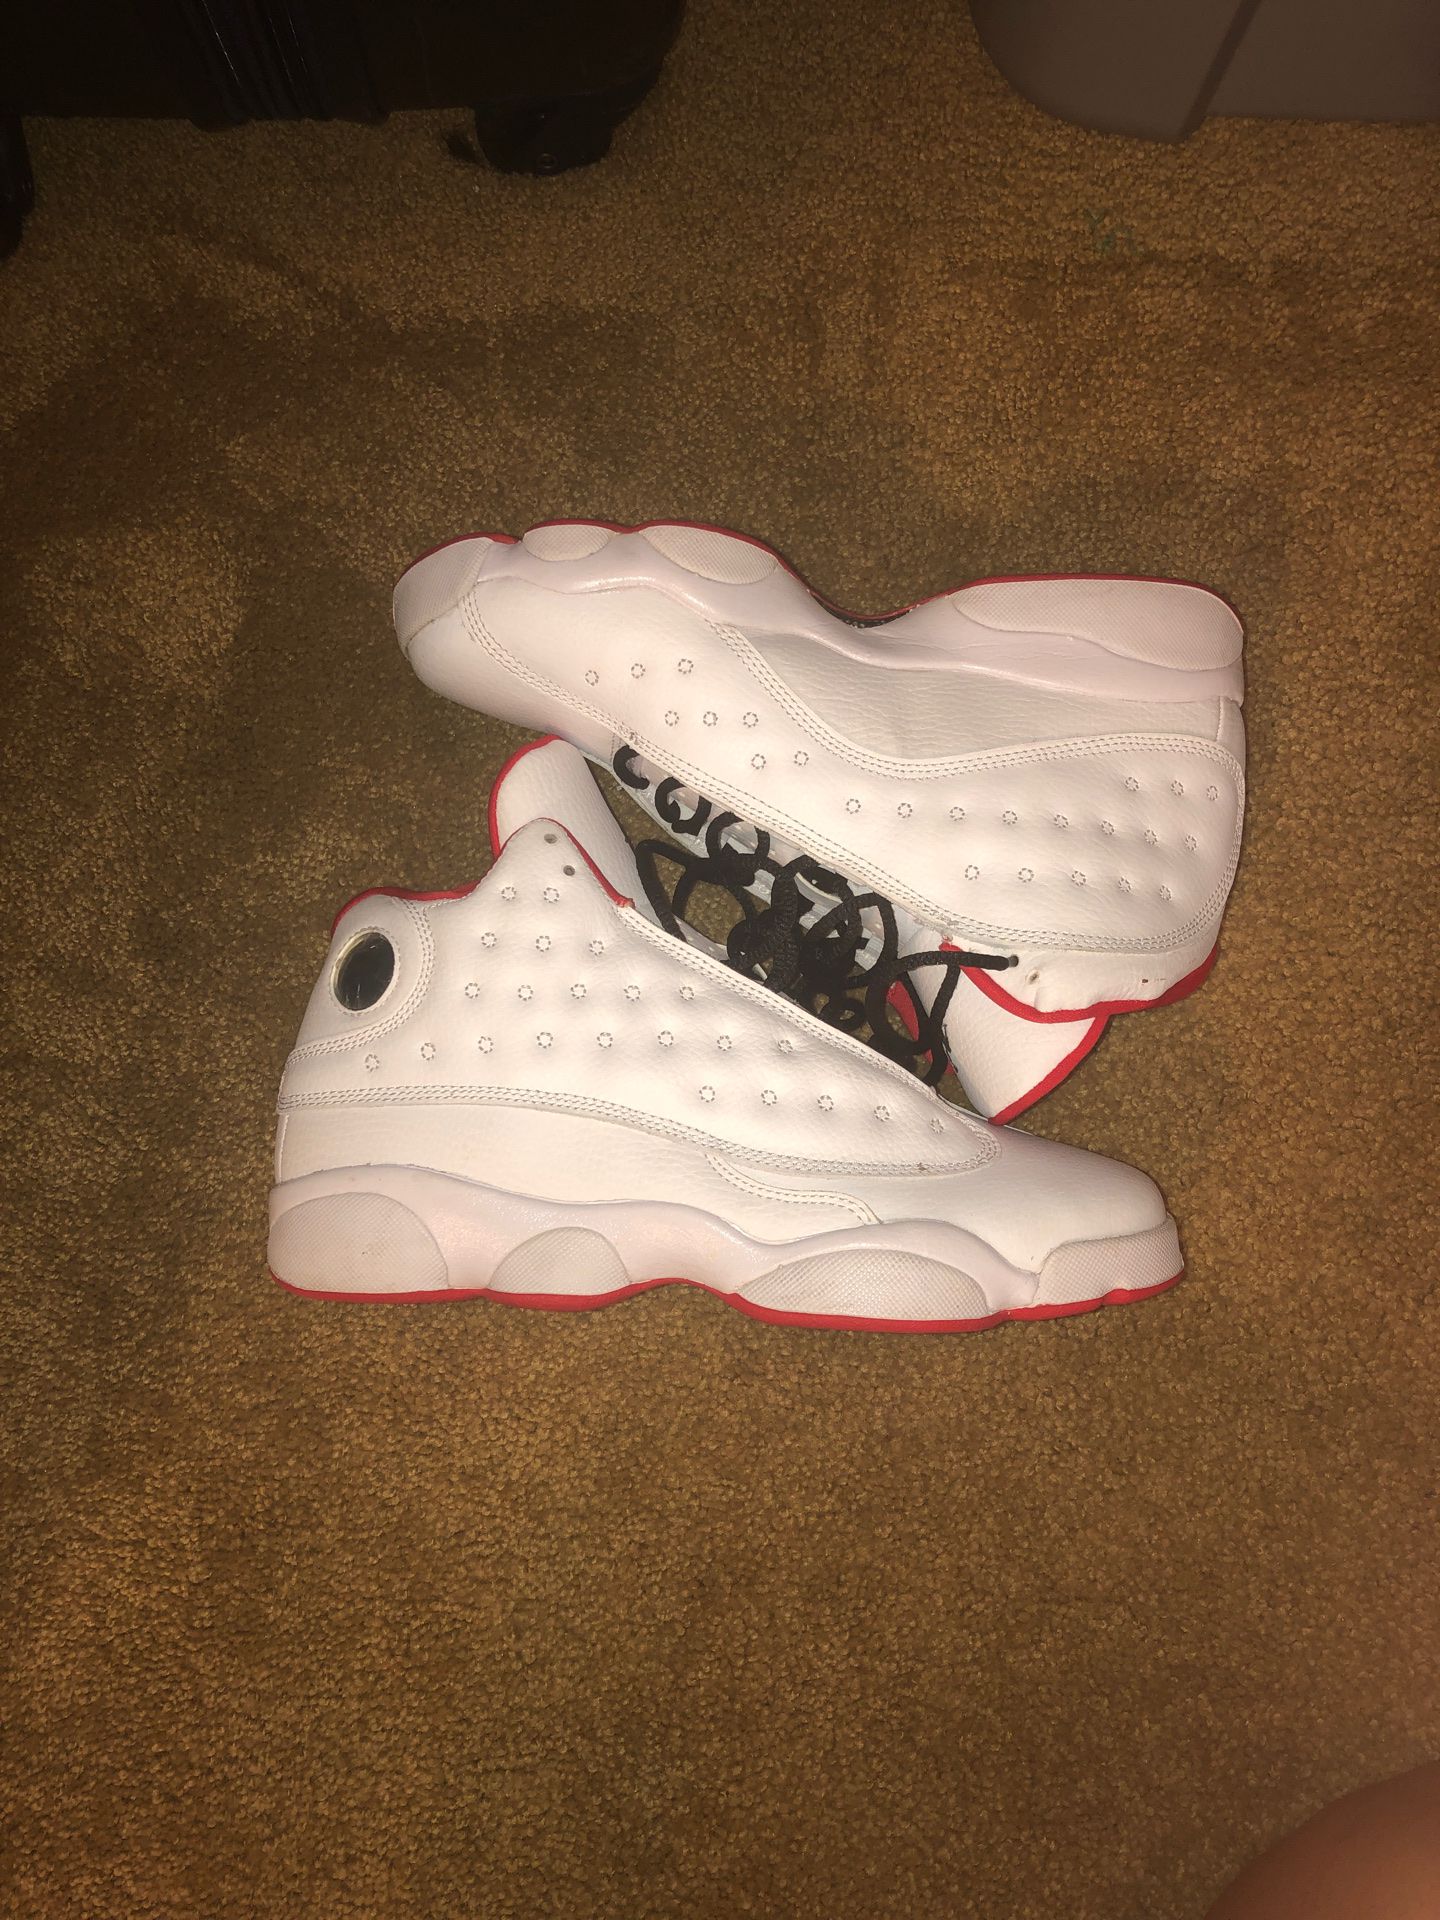 Jordan Retro 13s Size 7 Youth/ Not Accepting Cash/Great Shape/Missing Box